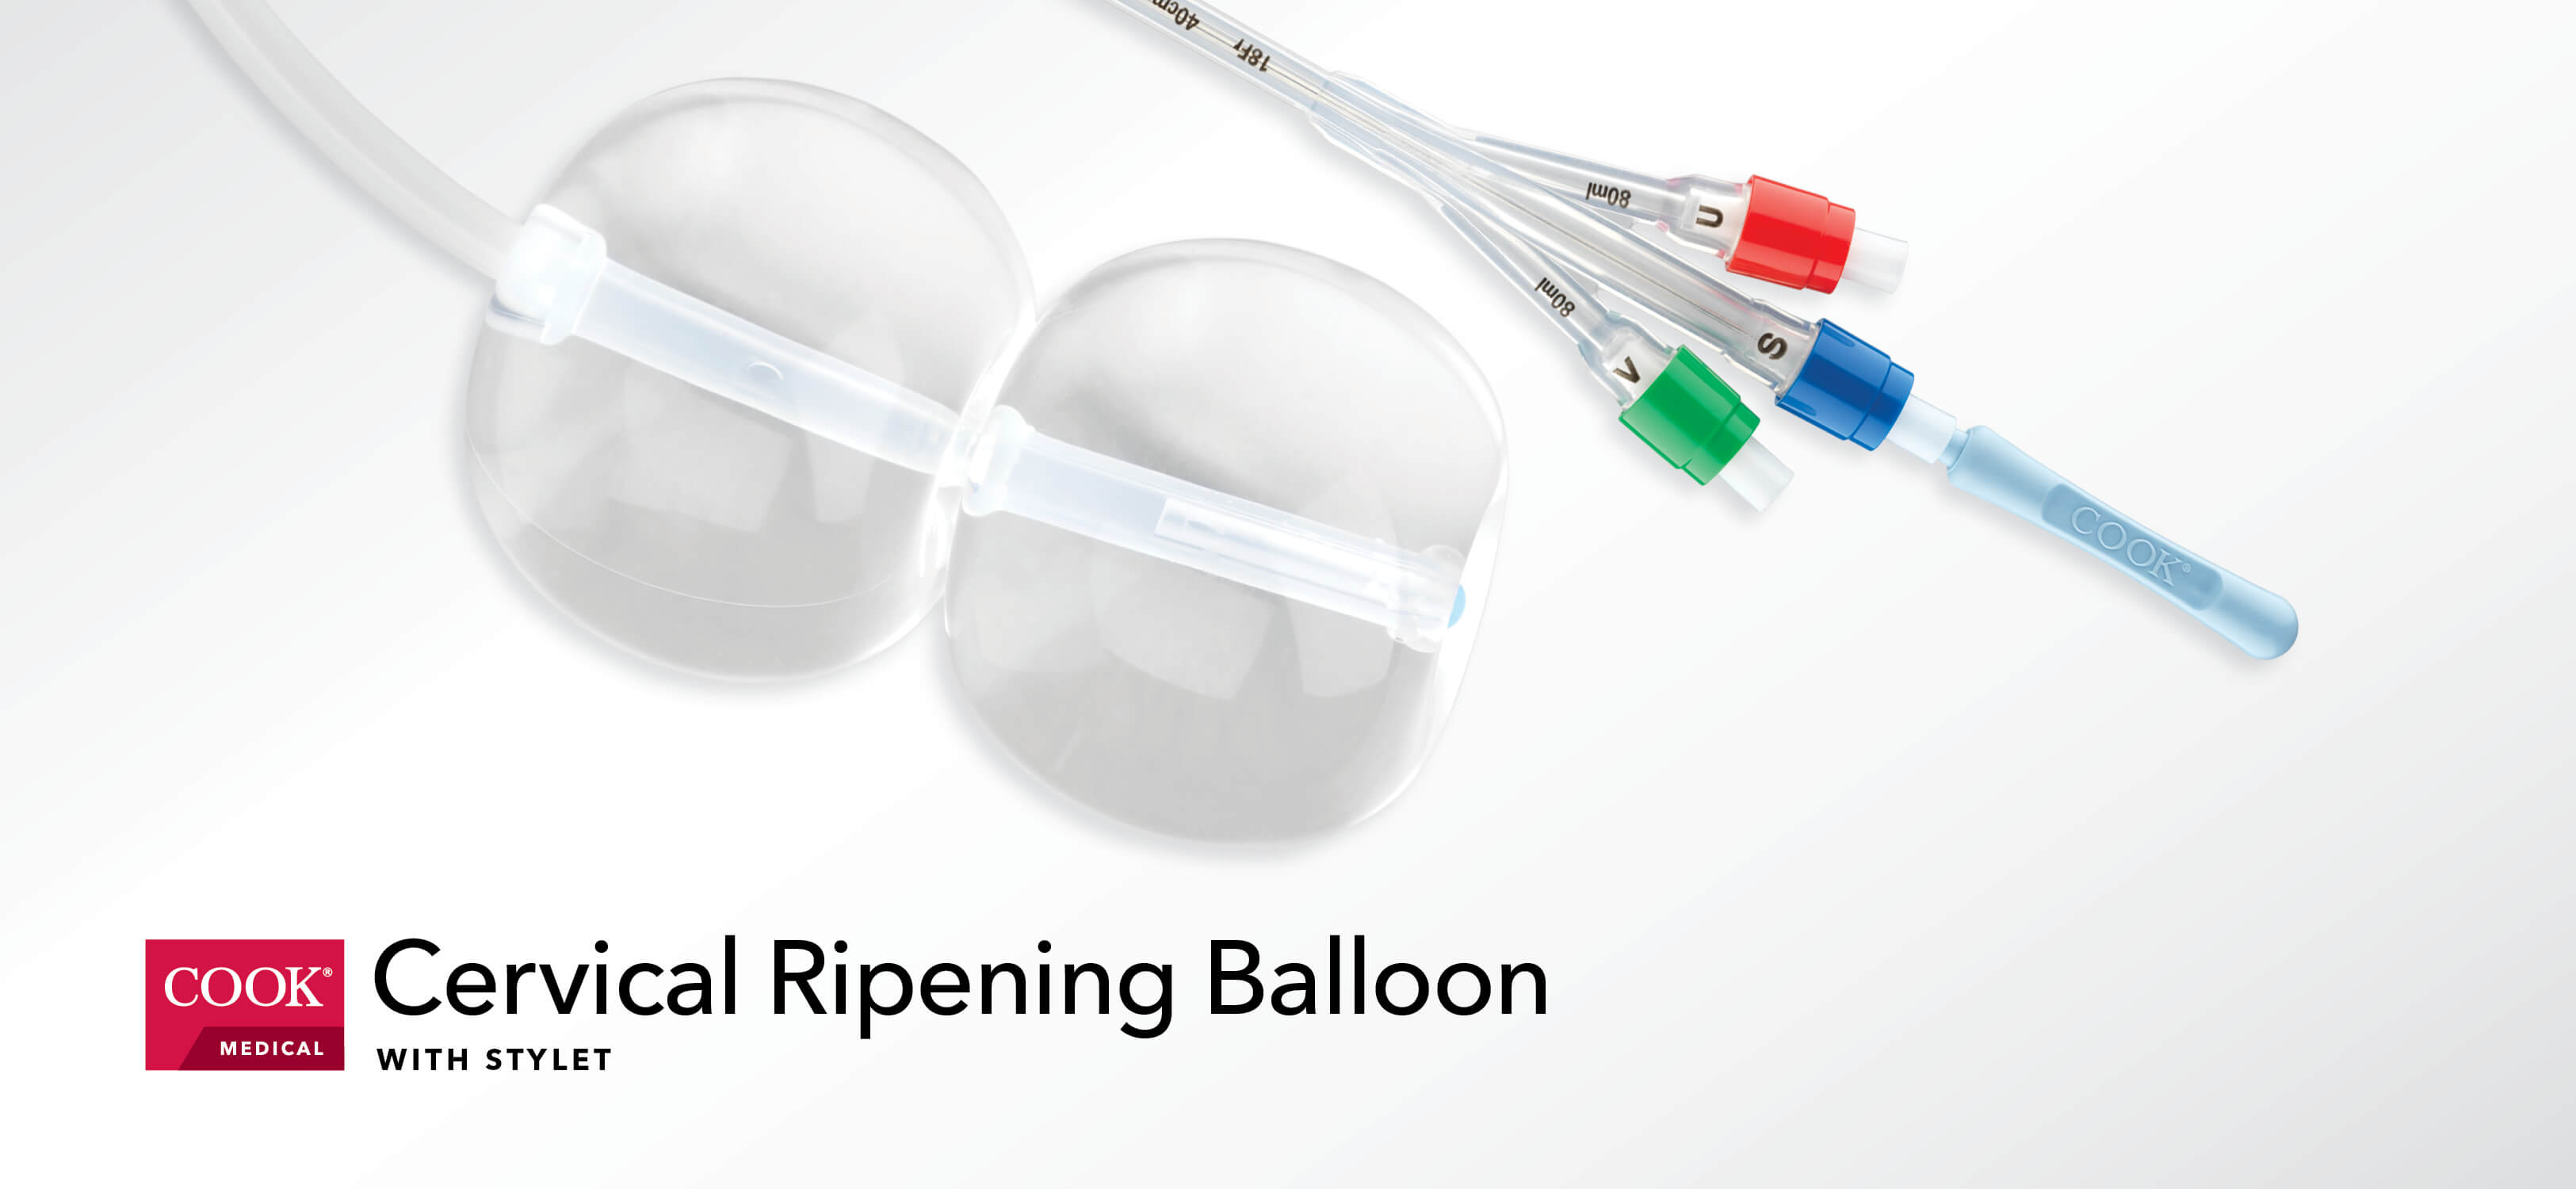 Cervical Ripening Balloon with Stylet image